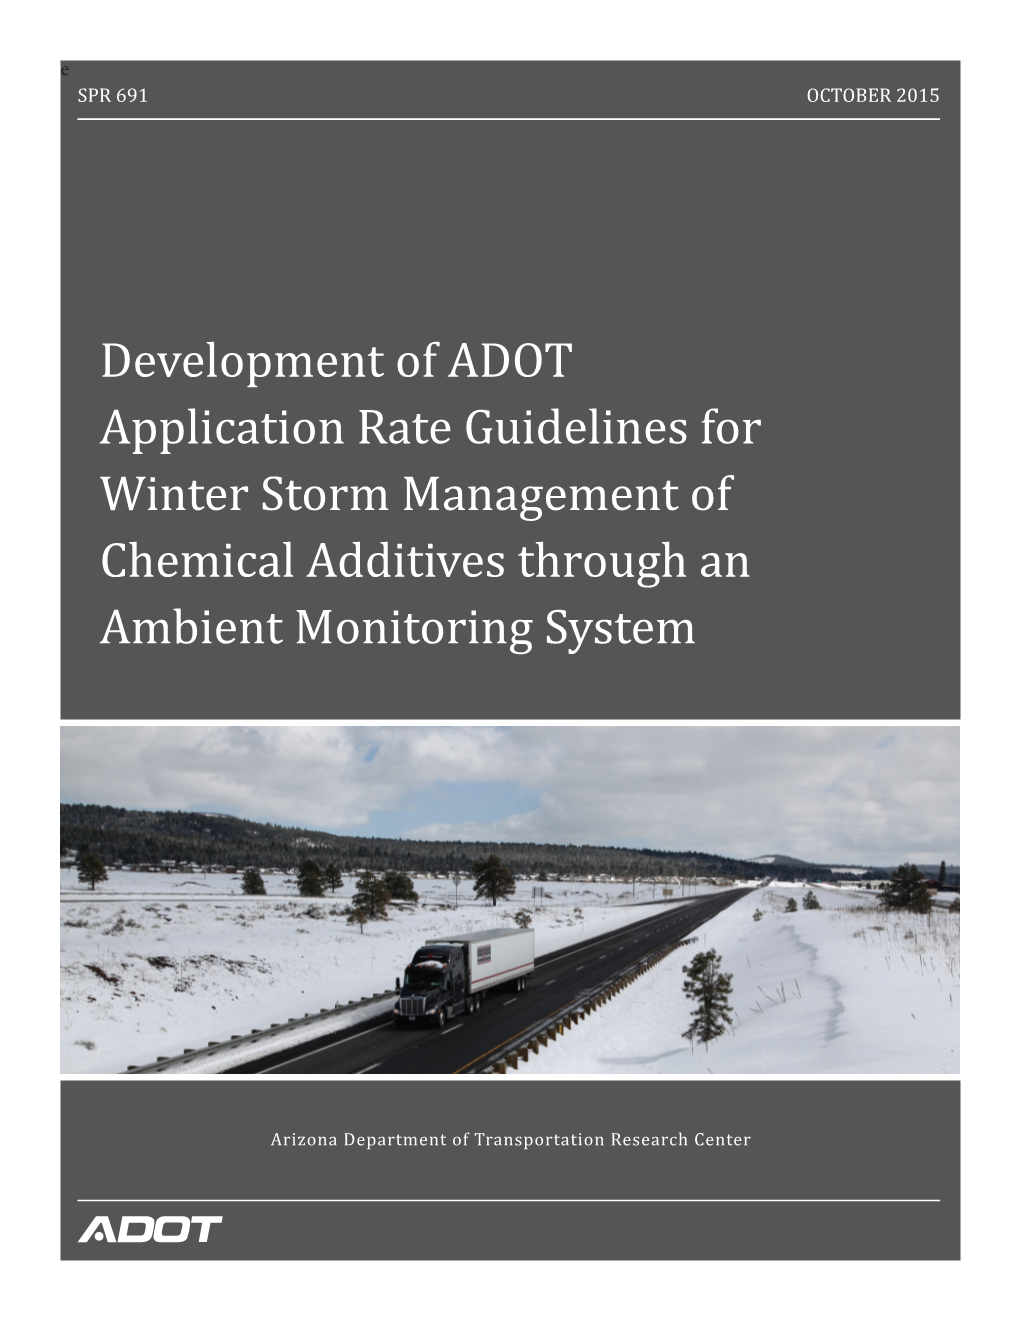 SPR-691: Development of ADOT Application Rate Guidelines For